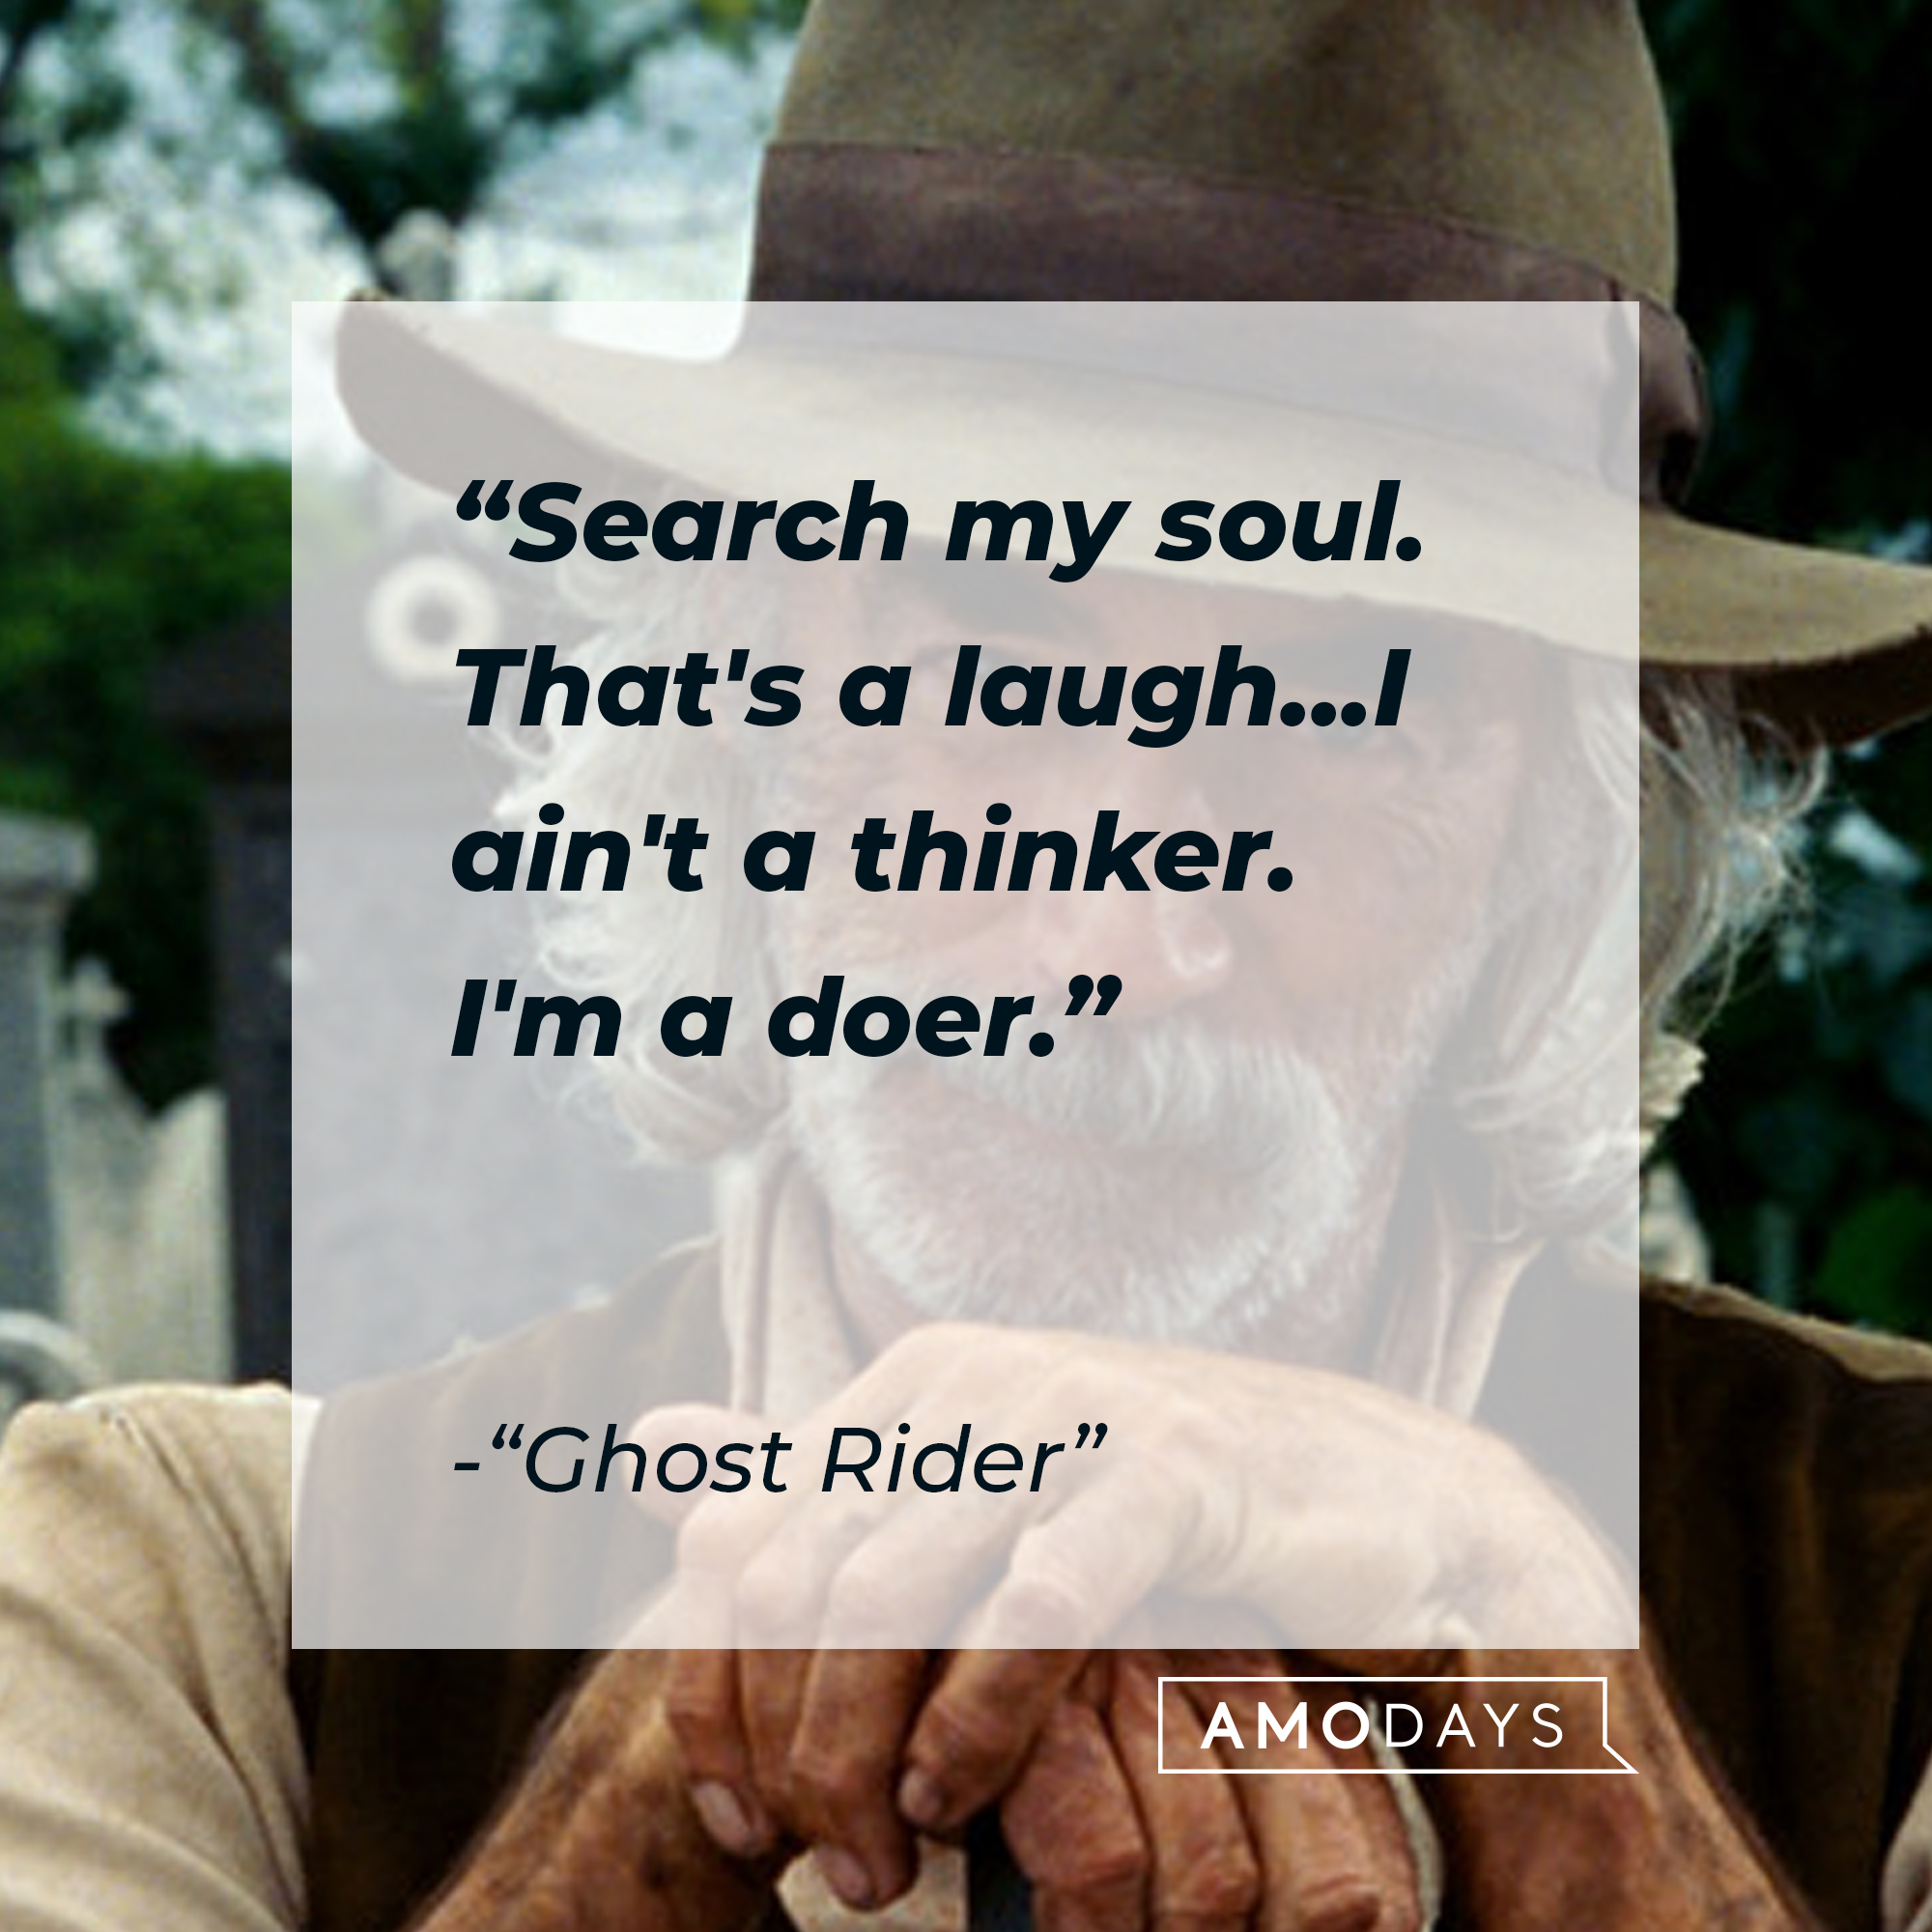 "Ghost Rider" quote: "Search my soul. That's a laugh...I ain't a thinker. I'm a doer."| Source: facebook.com/ghostridermovie